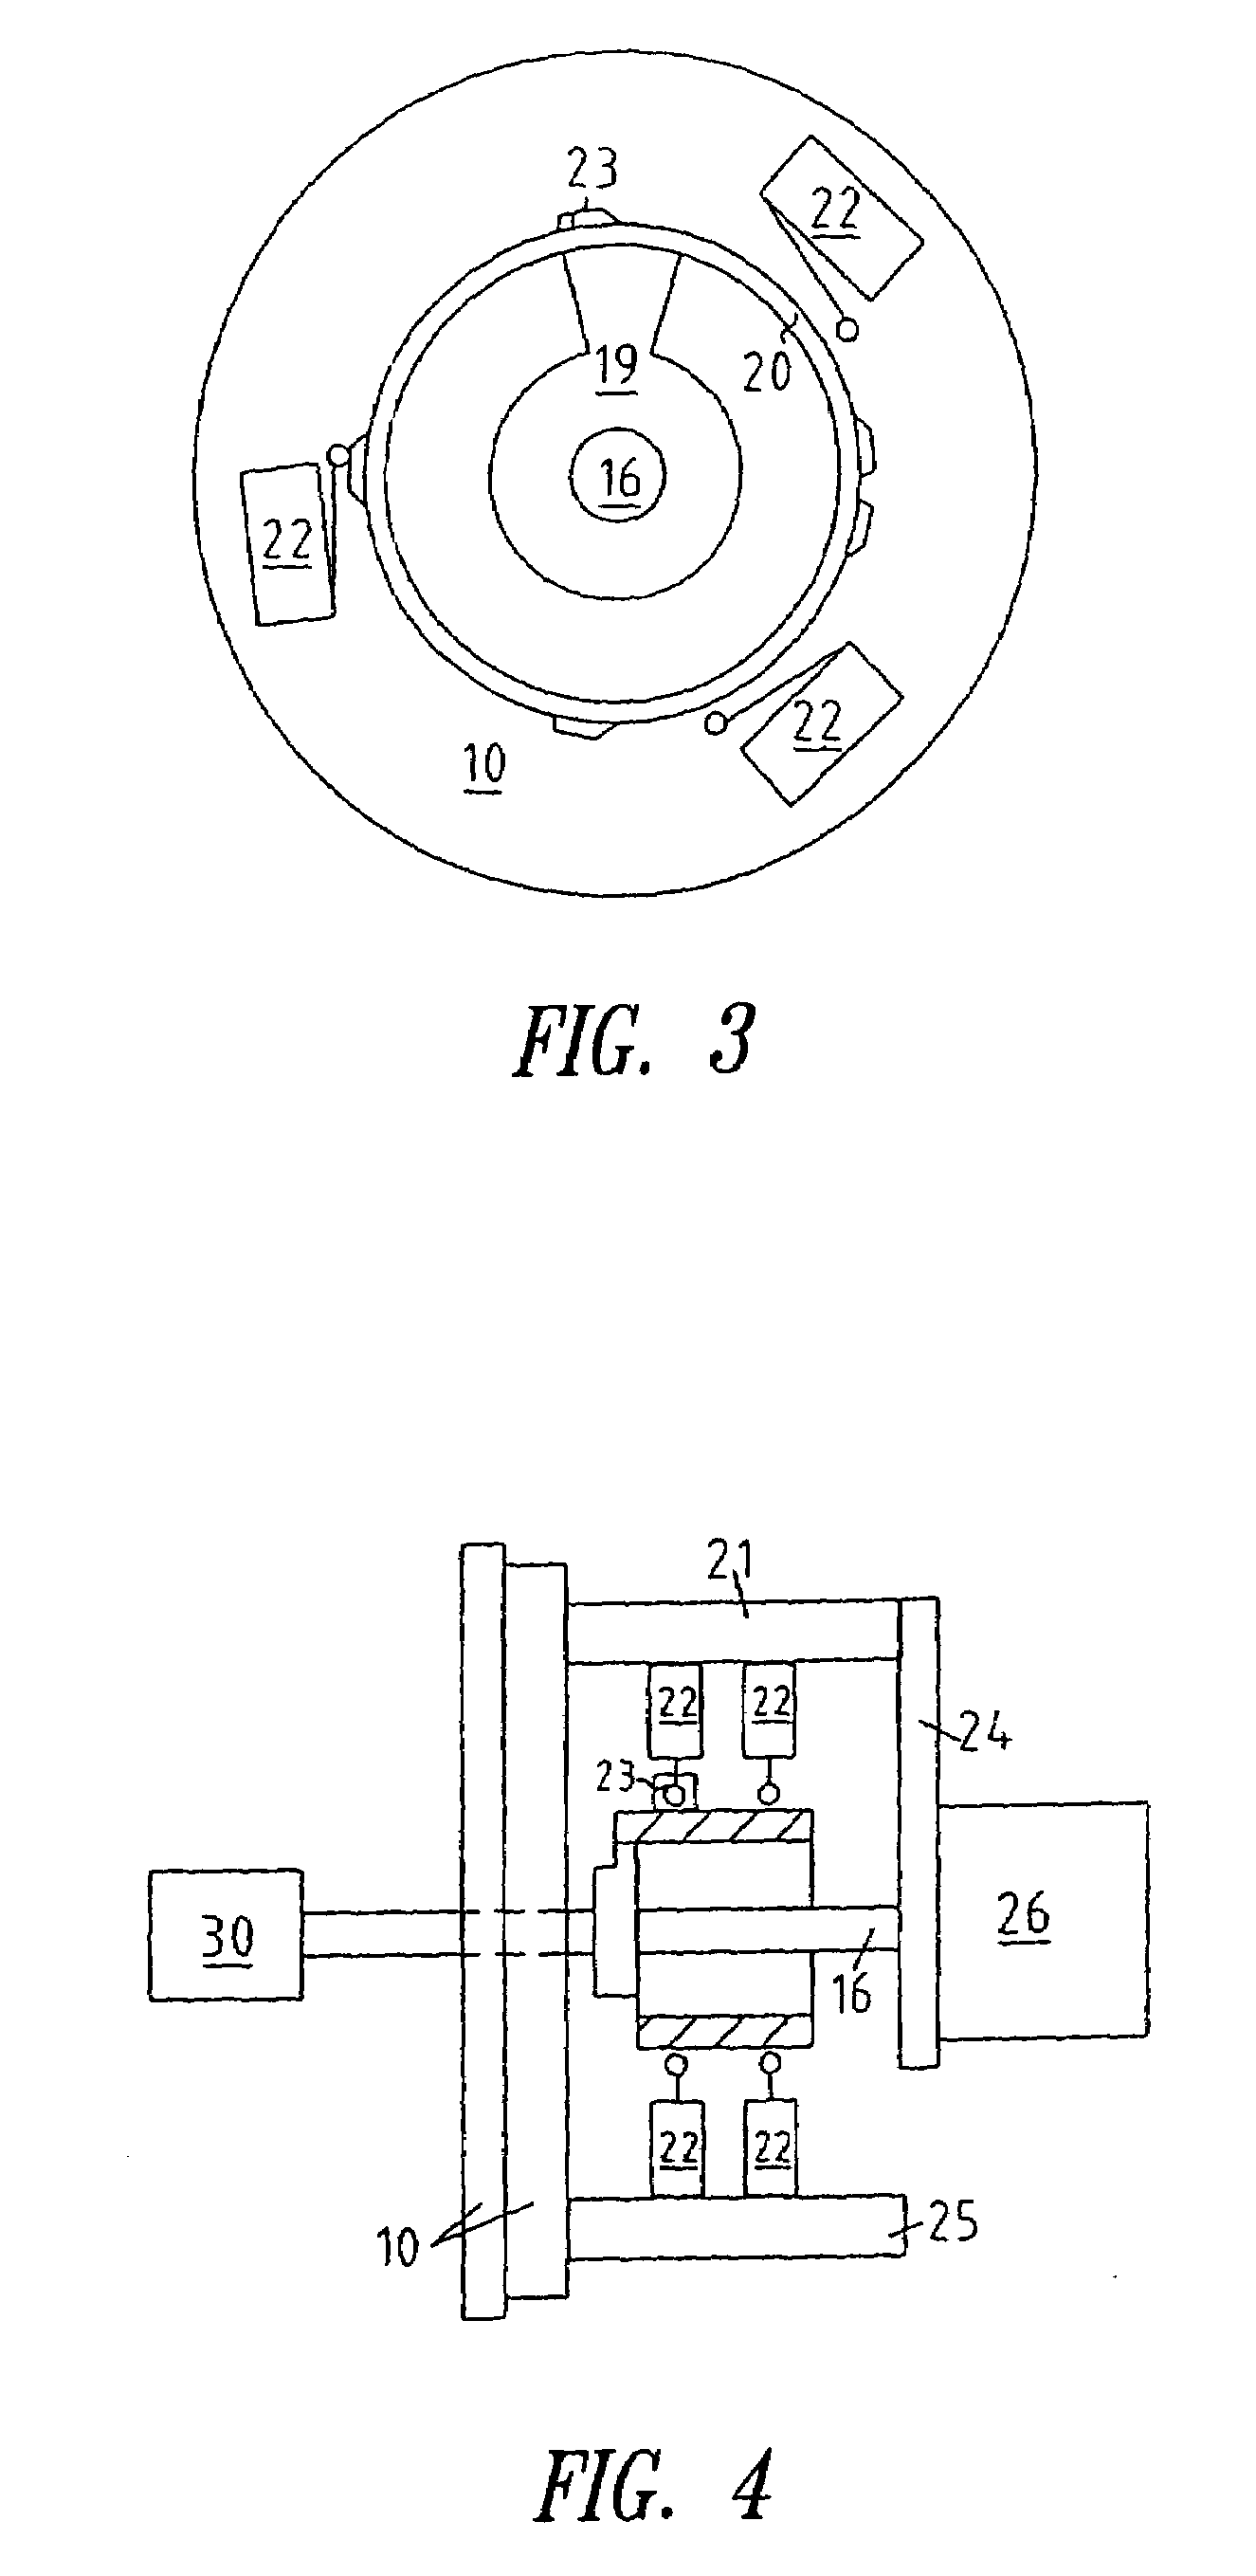 Switching apparatus with an actuating shaft